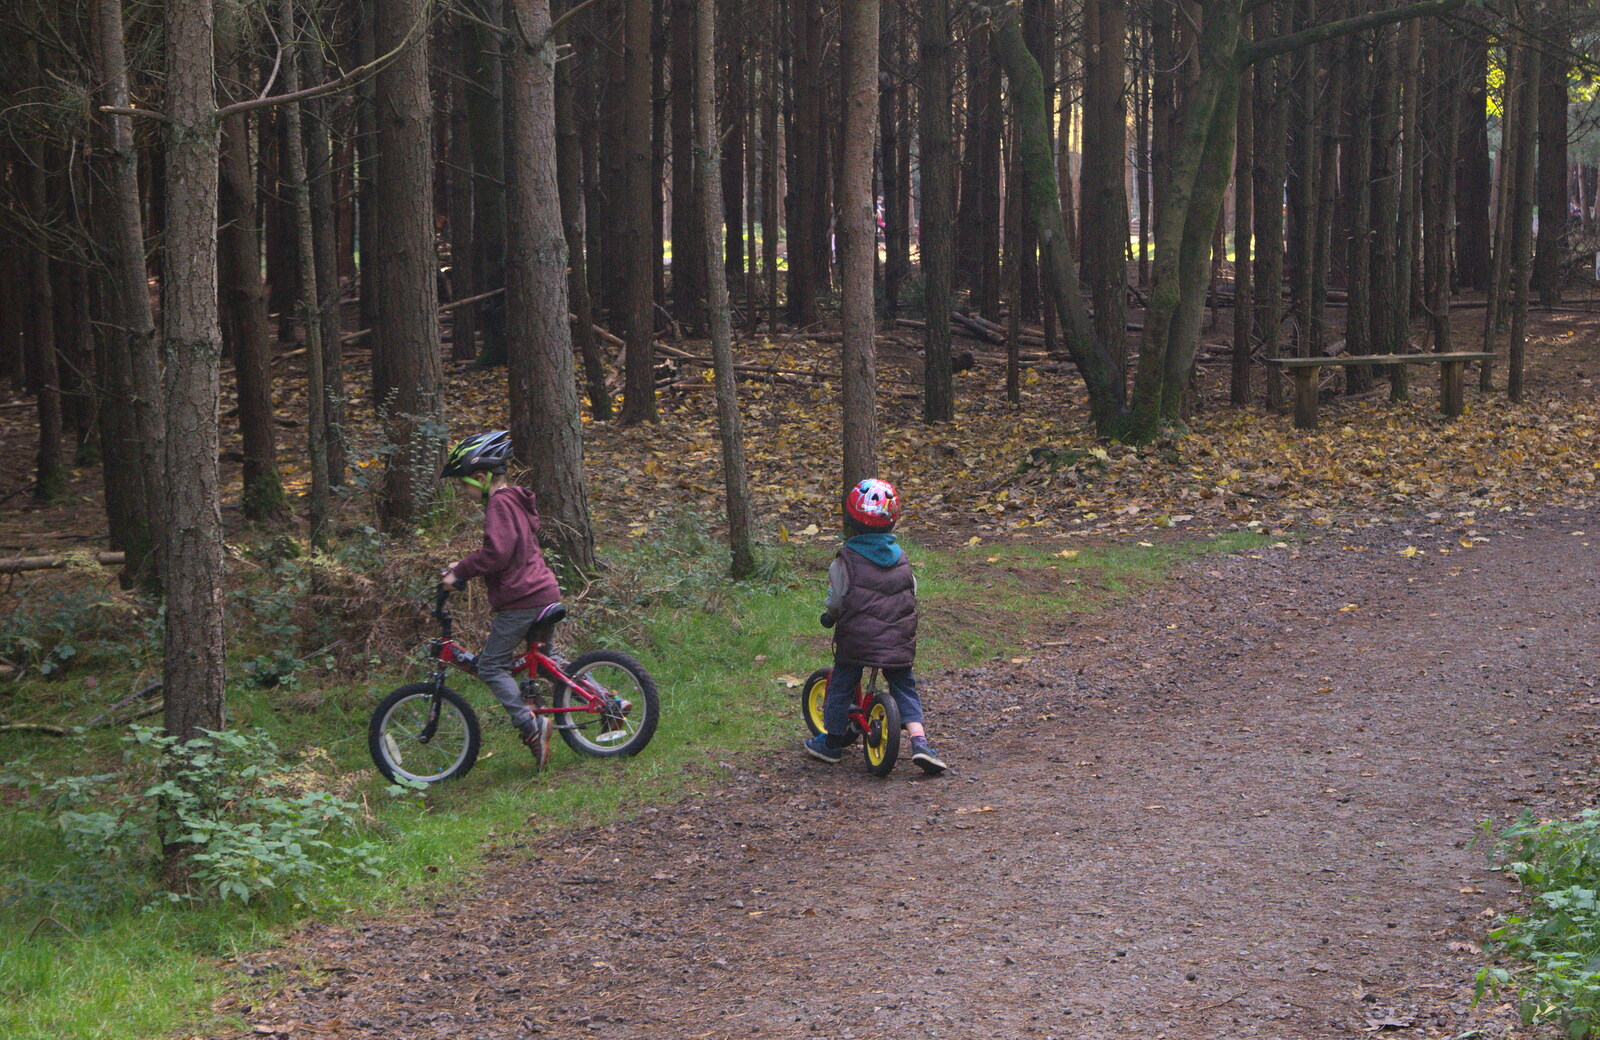 Fred and Harry head off in to the woods from A Day at High Lodge, Brandon Forest, Suffolk - 26th October 2015